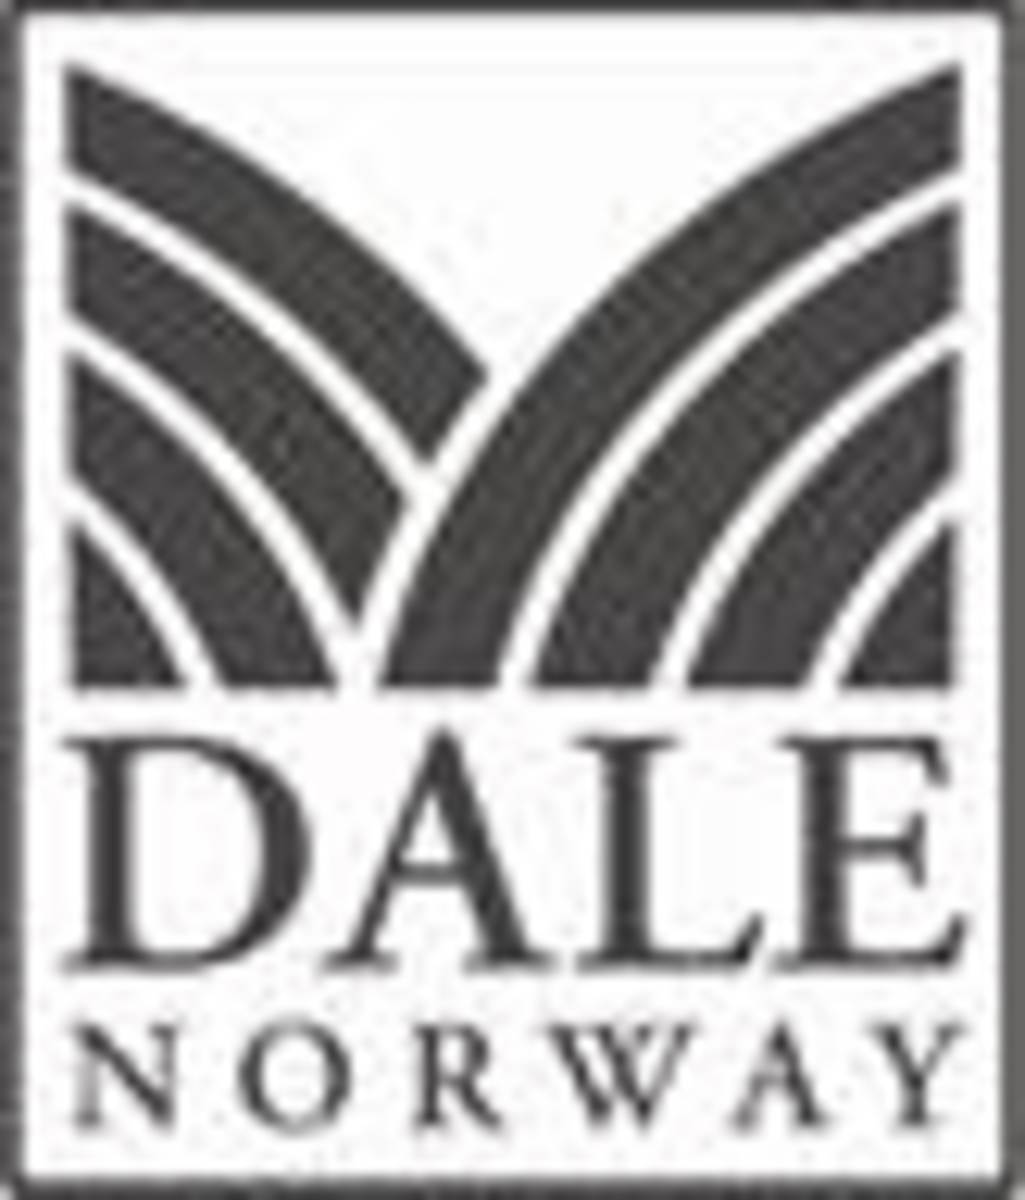 Dale Logo - Dale of Norway is the Official Sweater Brand of Ski Vermont - SNEWS